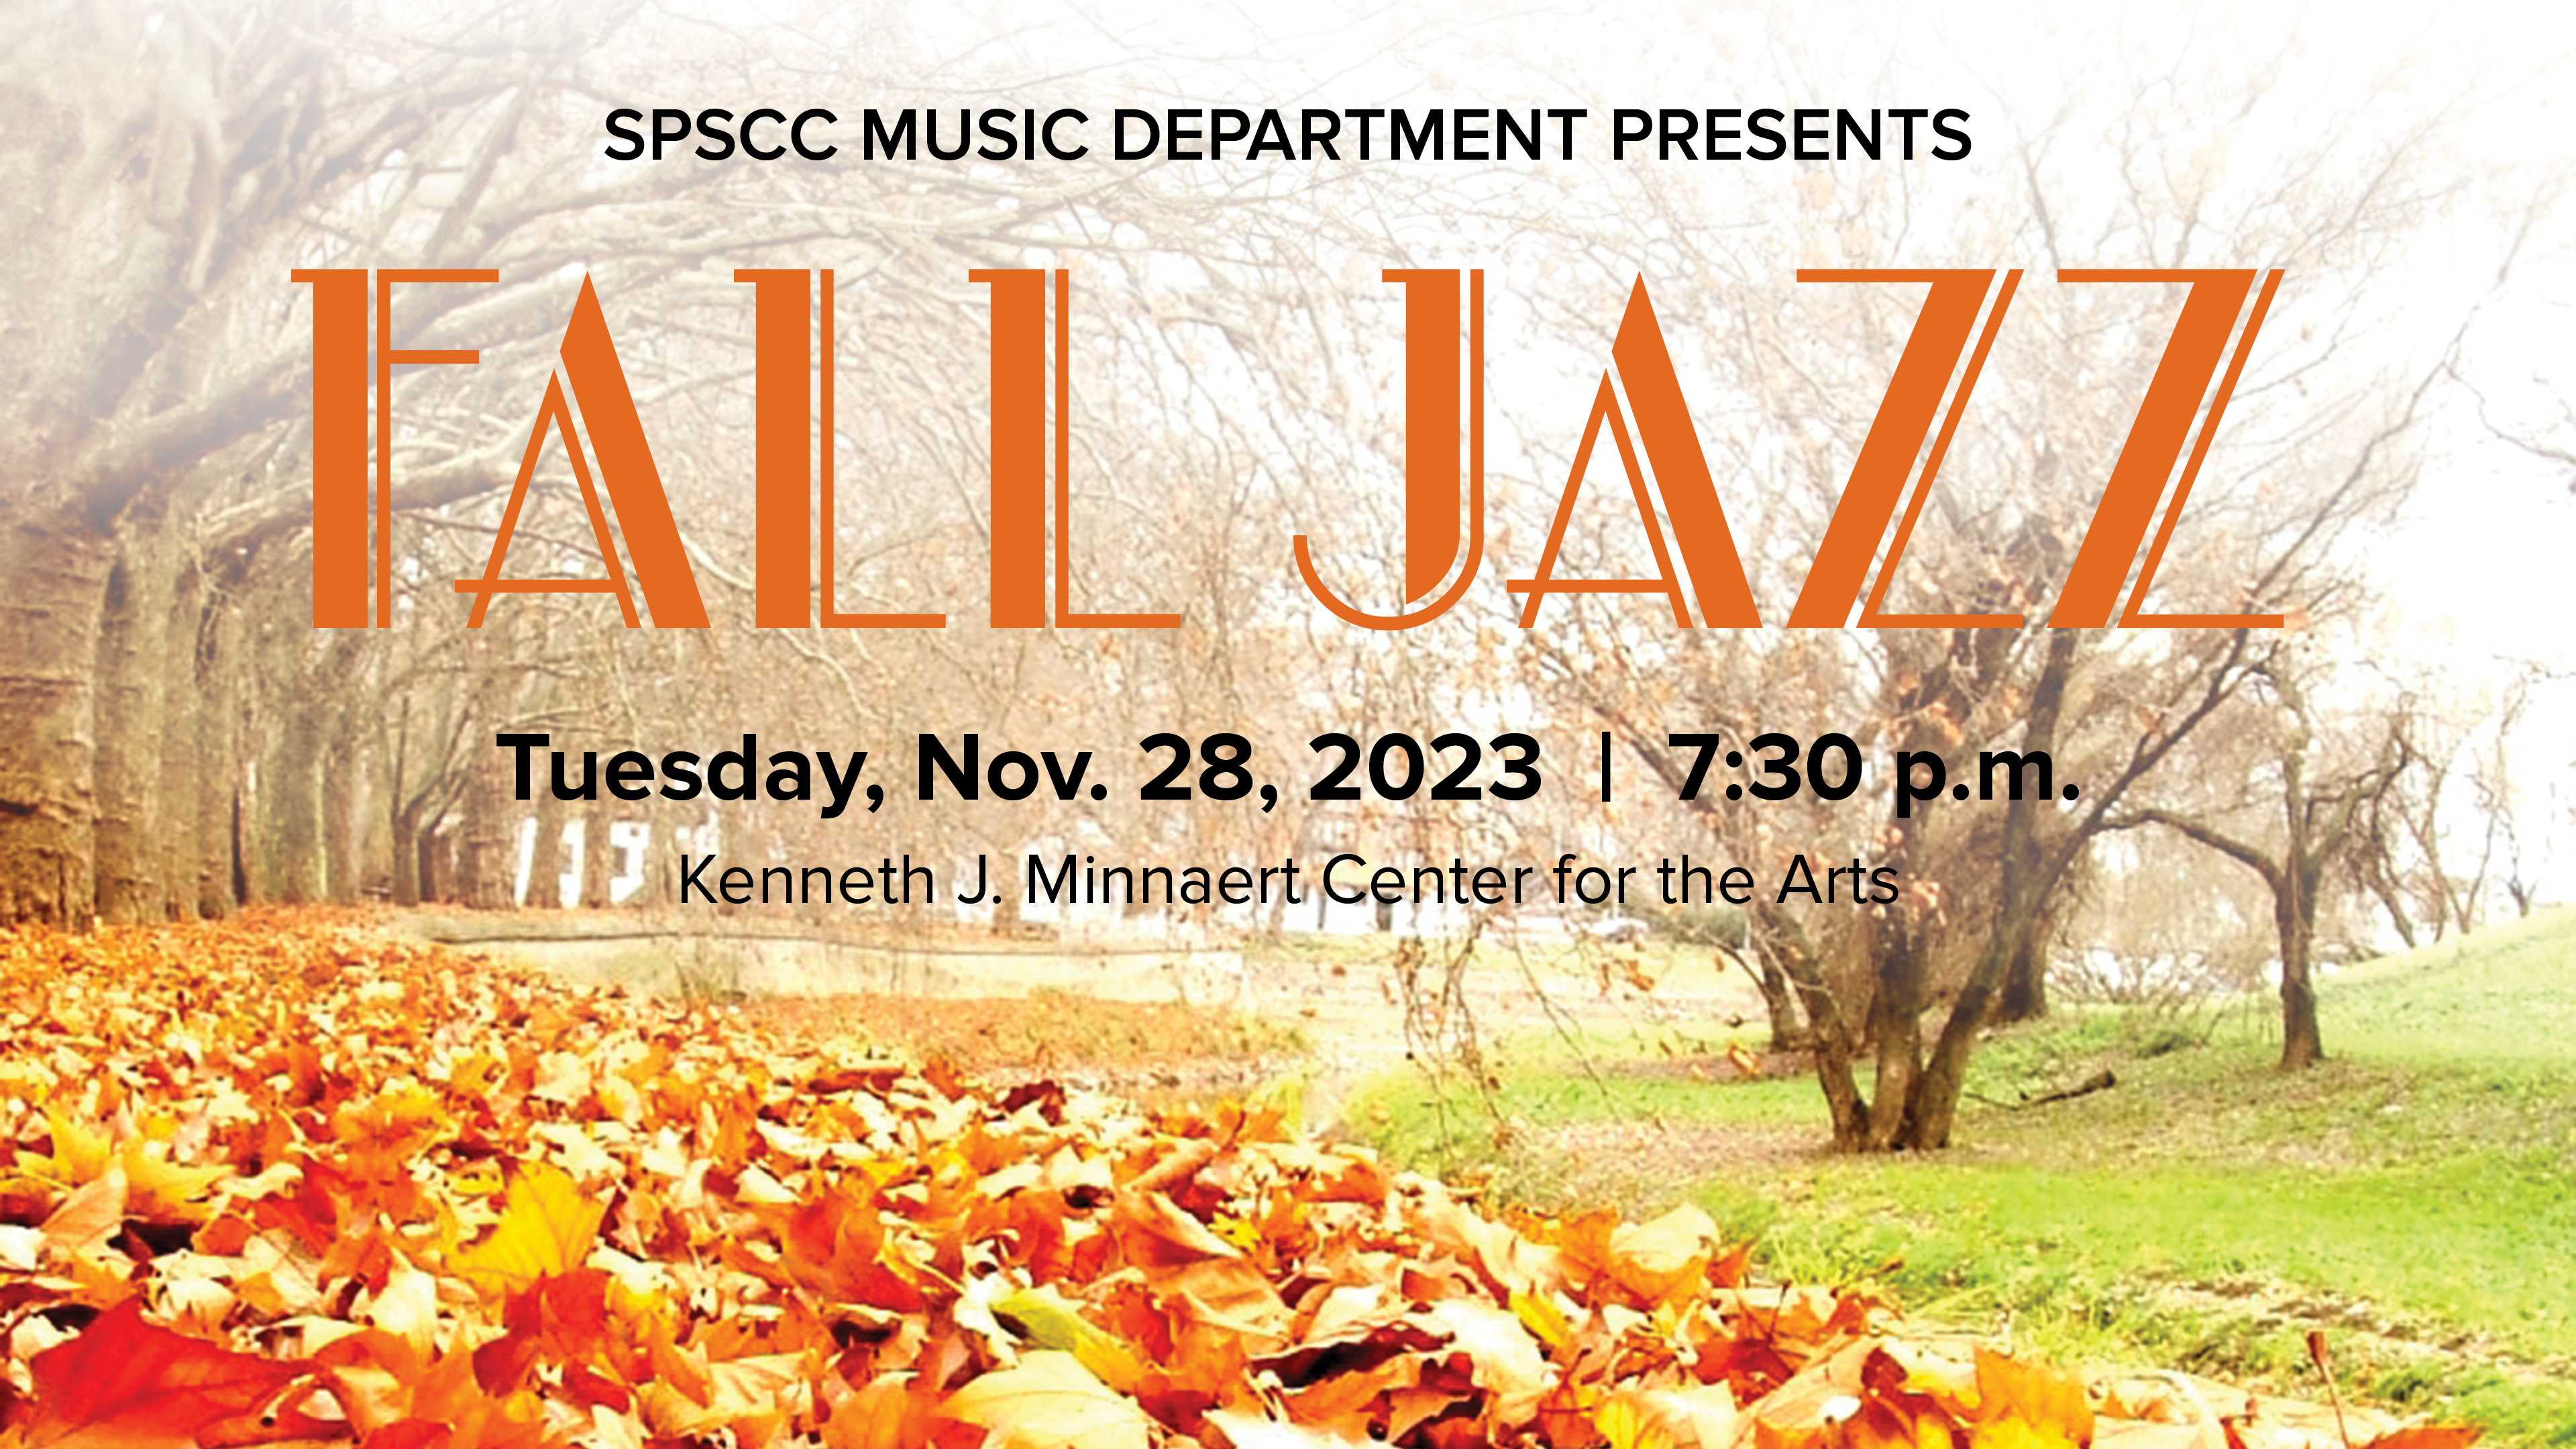 SPSCC Music Department presents Fall Jazz on Tuesday, Nov. 28, 2023 | 7:30 p.m. at the Kenneth J. Minnaert Center for the Arts